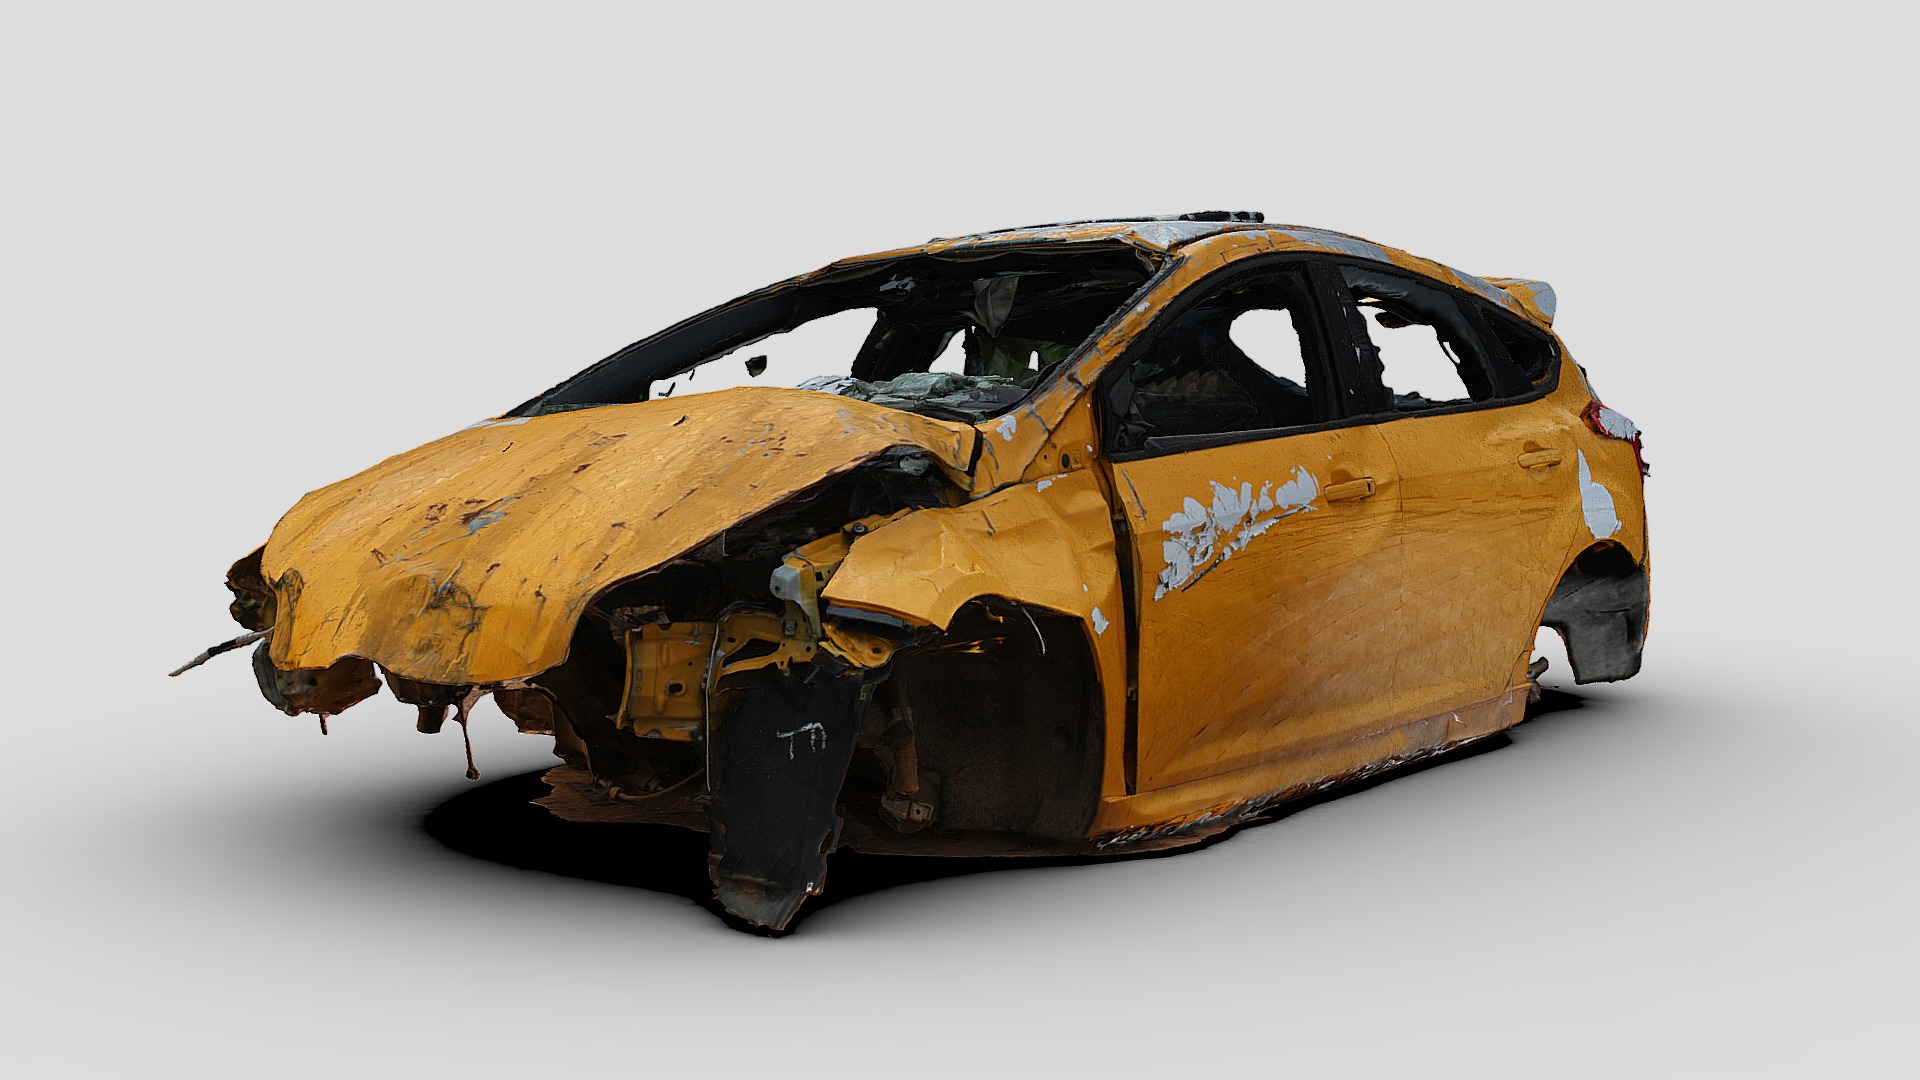 3D model Rolled Junkyard Car (Raw Scan) - This is a 3D model of the Rolled Junkyard Car (Raw Scan). The 3D model is about a toy car on a white background.